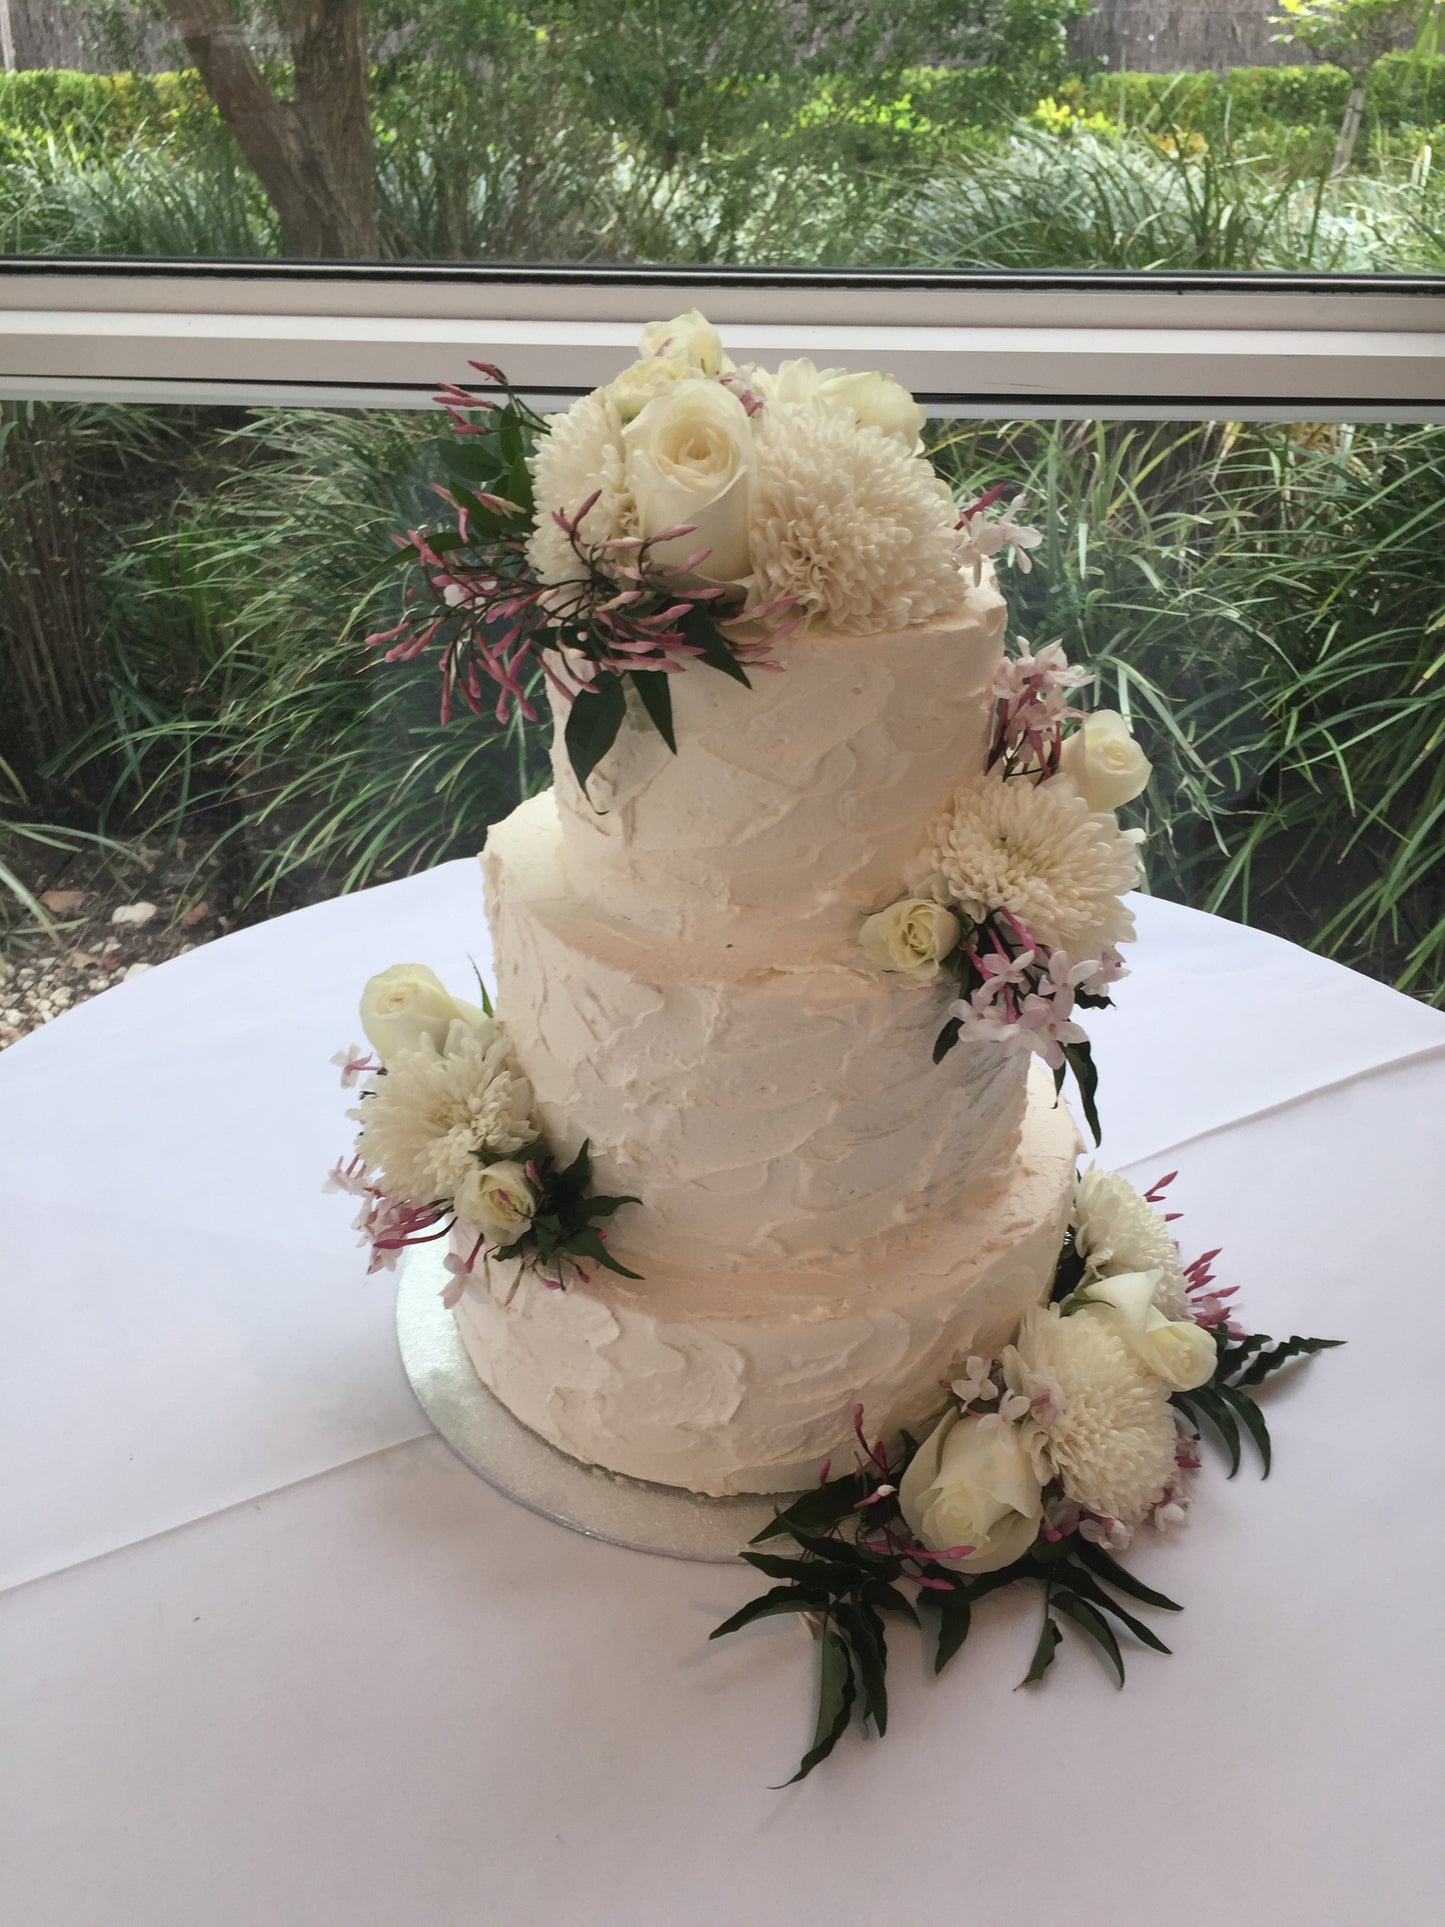 3 Tier Ivory Rough Buttercream with Fresh Flowers